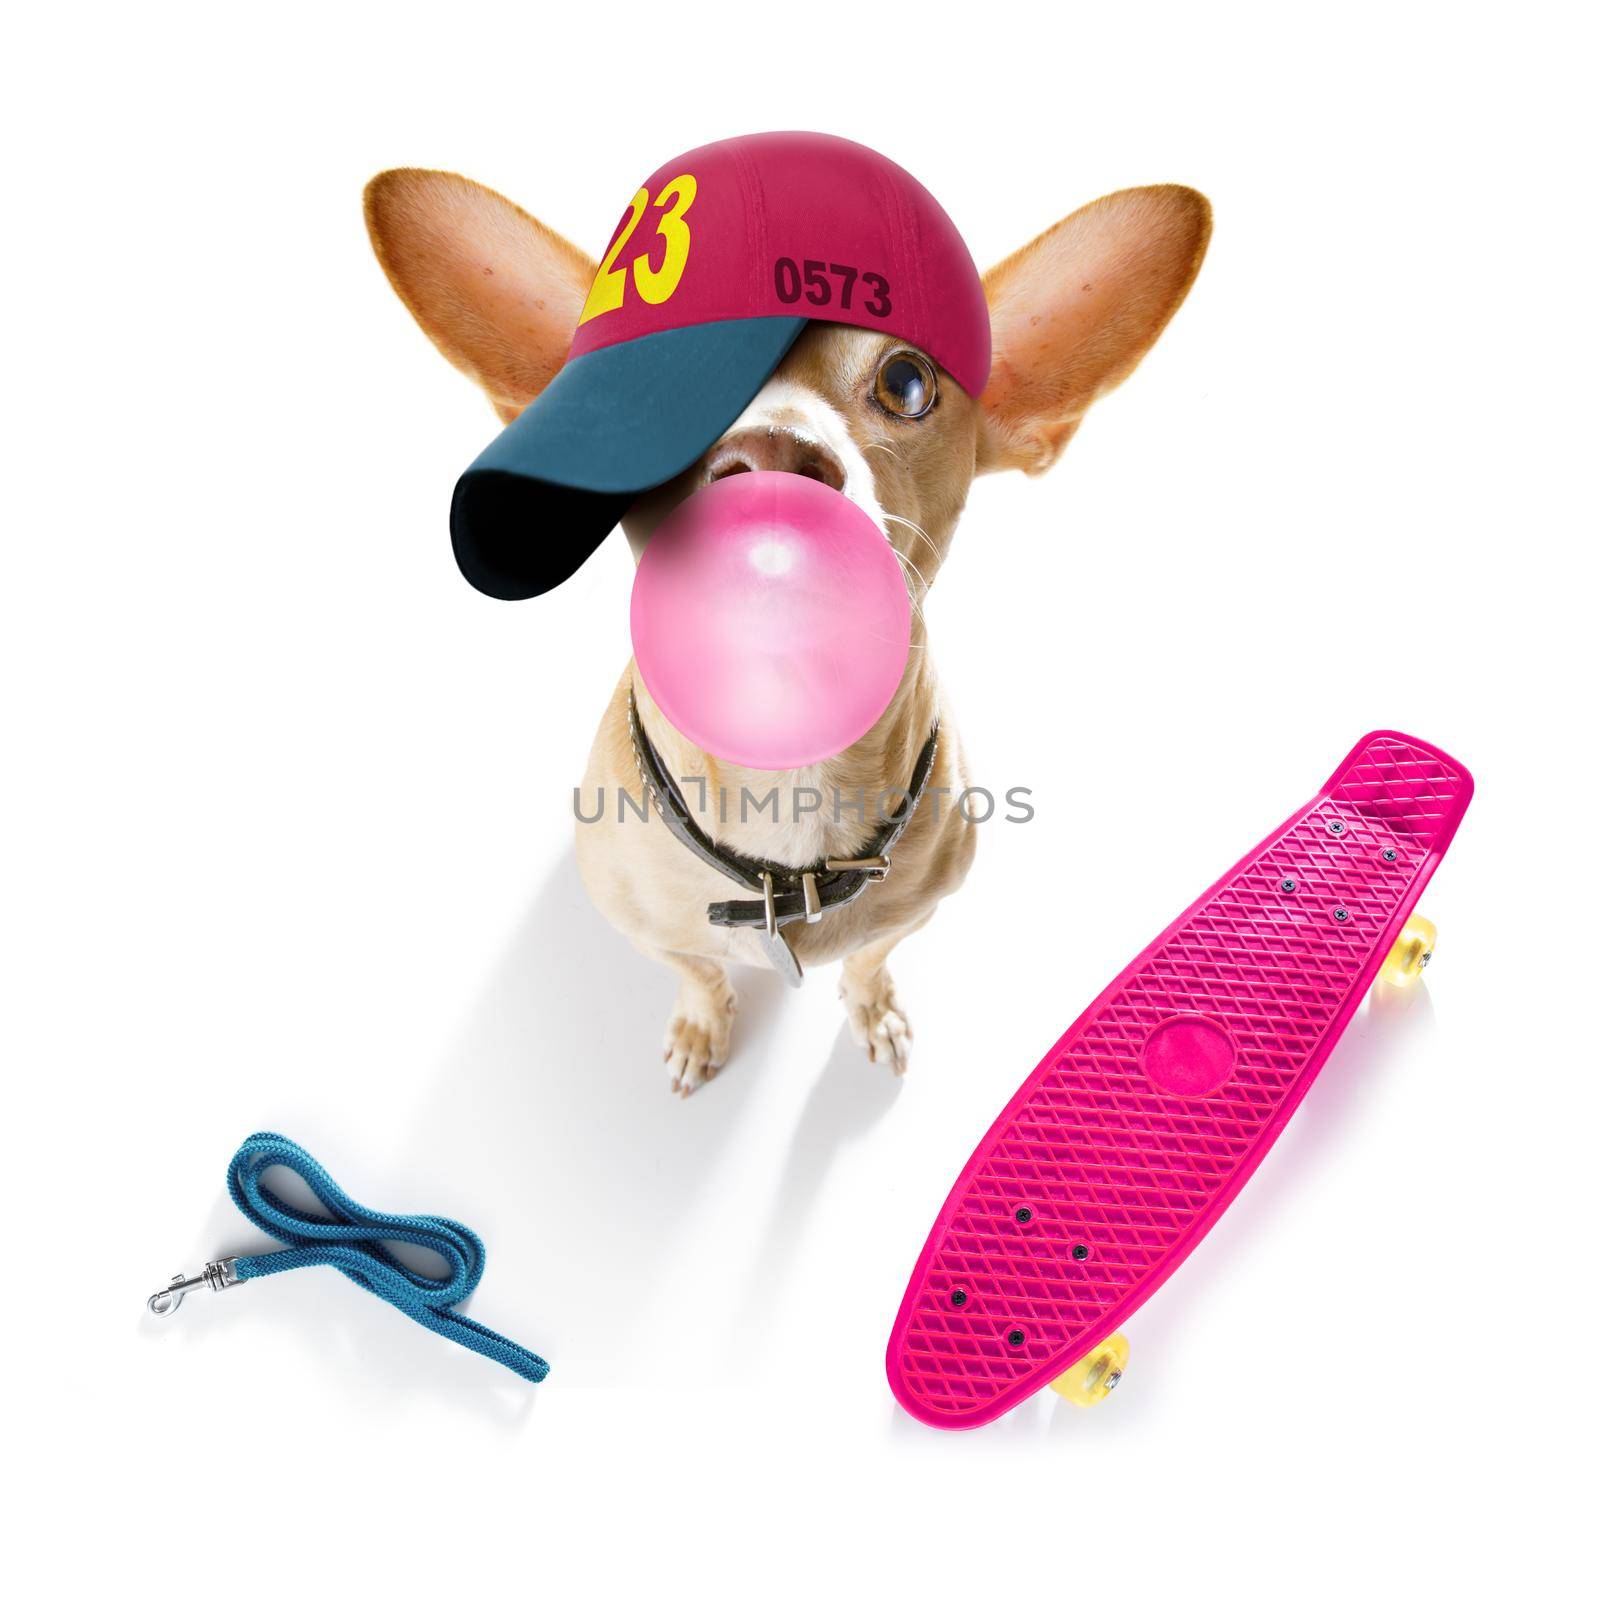 cool casual look chihuahua dog wearing a baseball cap or hat , sporty and fit , on a skateboard ready for a walk